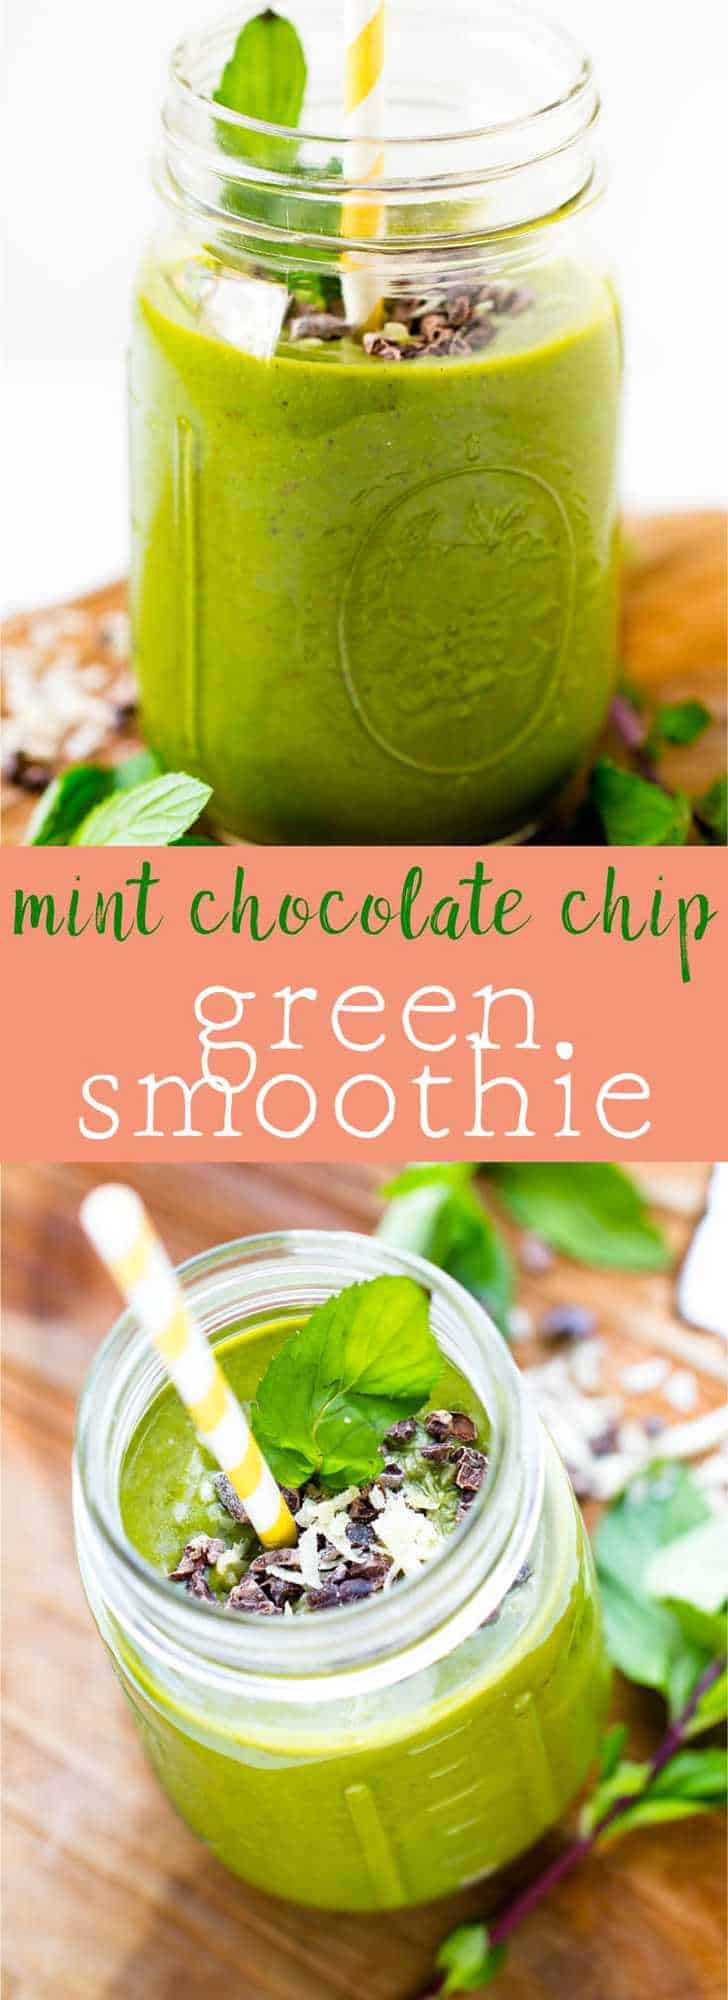 This Mint Chocolate Chip Green Smoothie is like dessert for breakfast with no guilt! It's quick, filling, nutritious and so tasty! via https://jessicainthekitchen.com